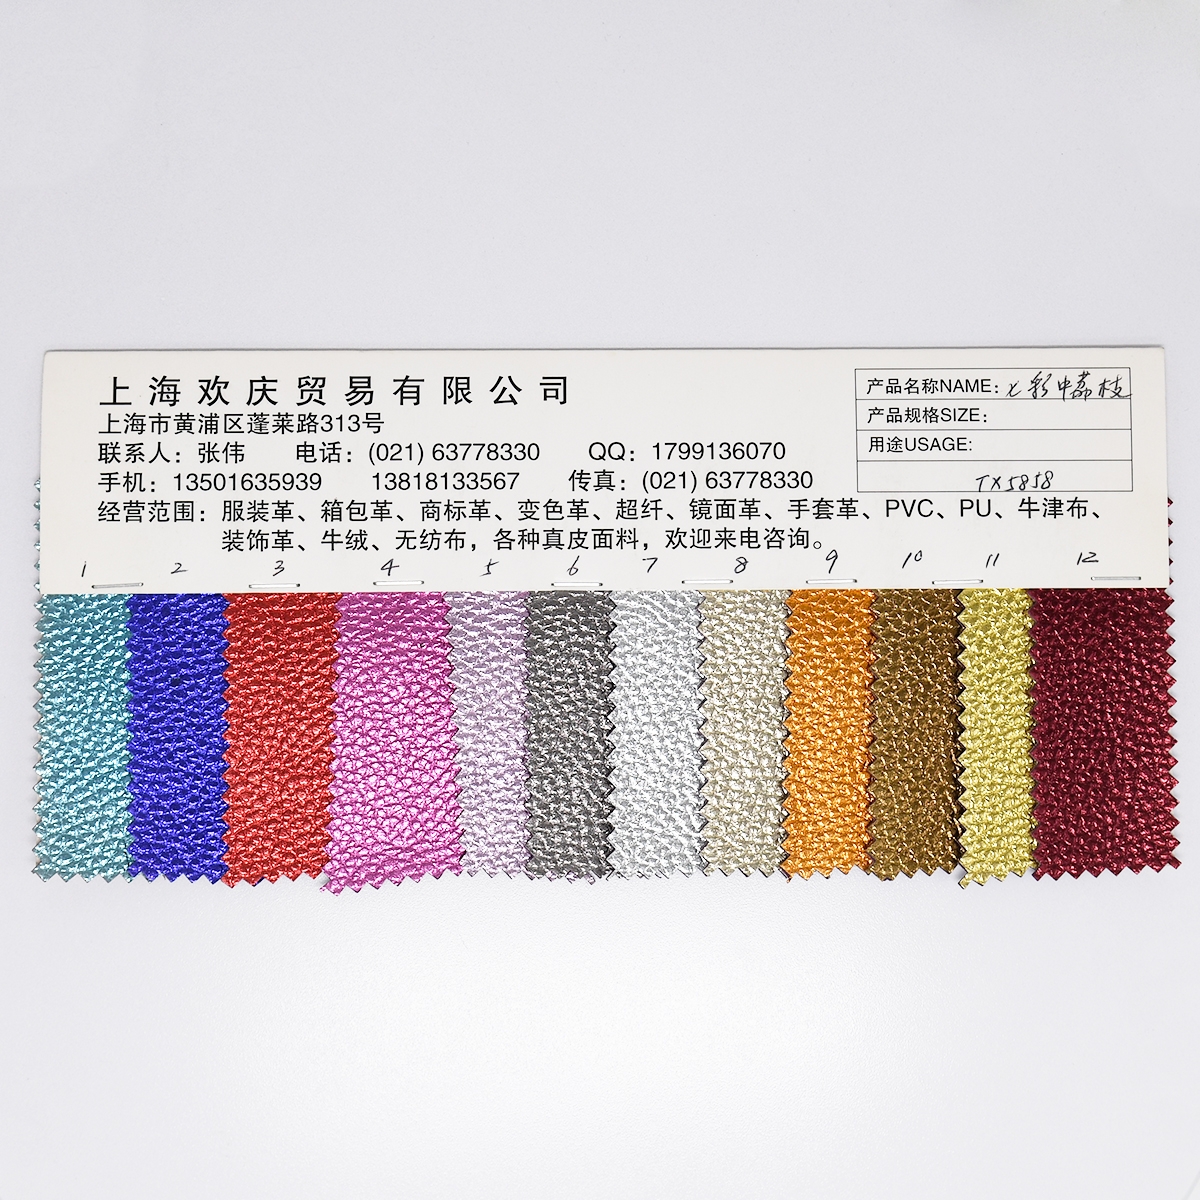 HUANG QING LEATHER